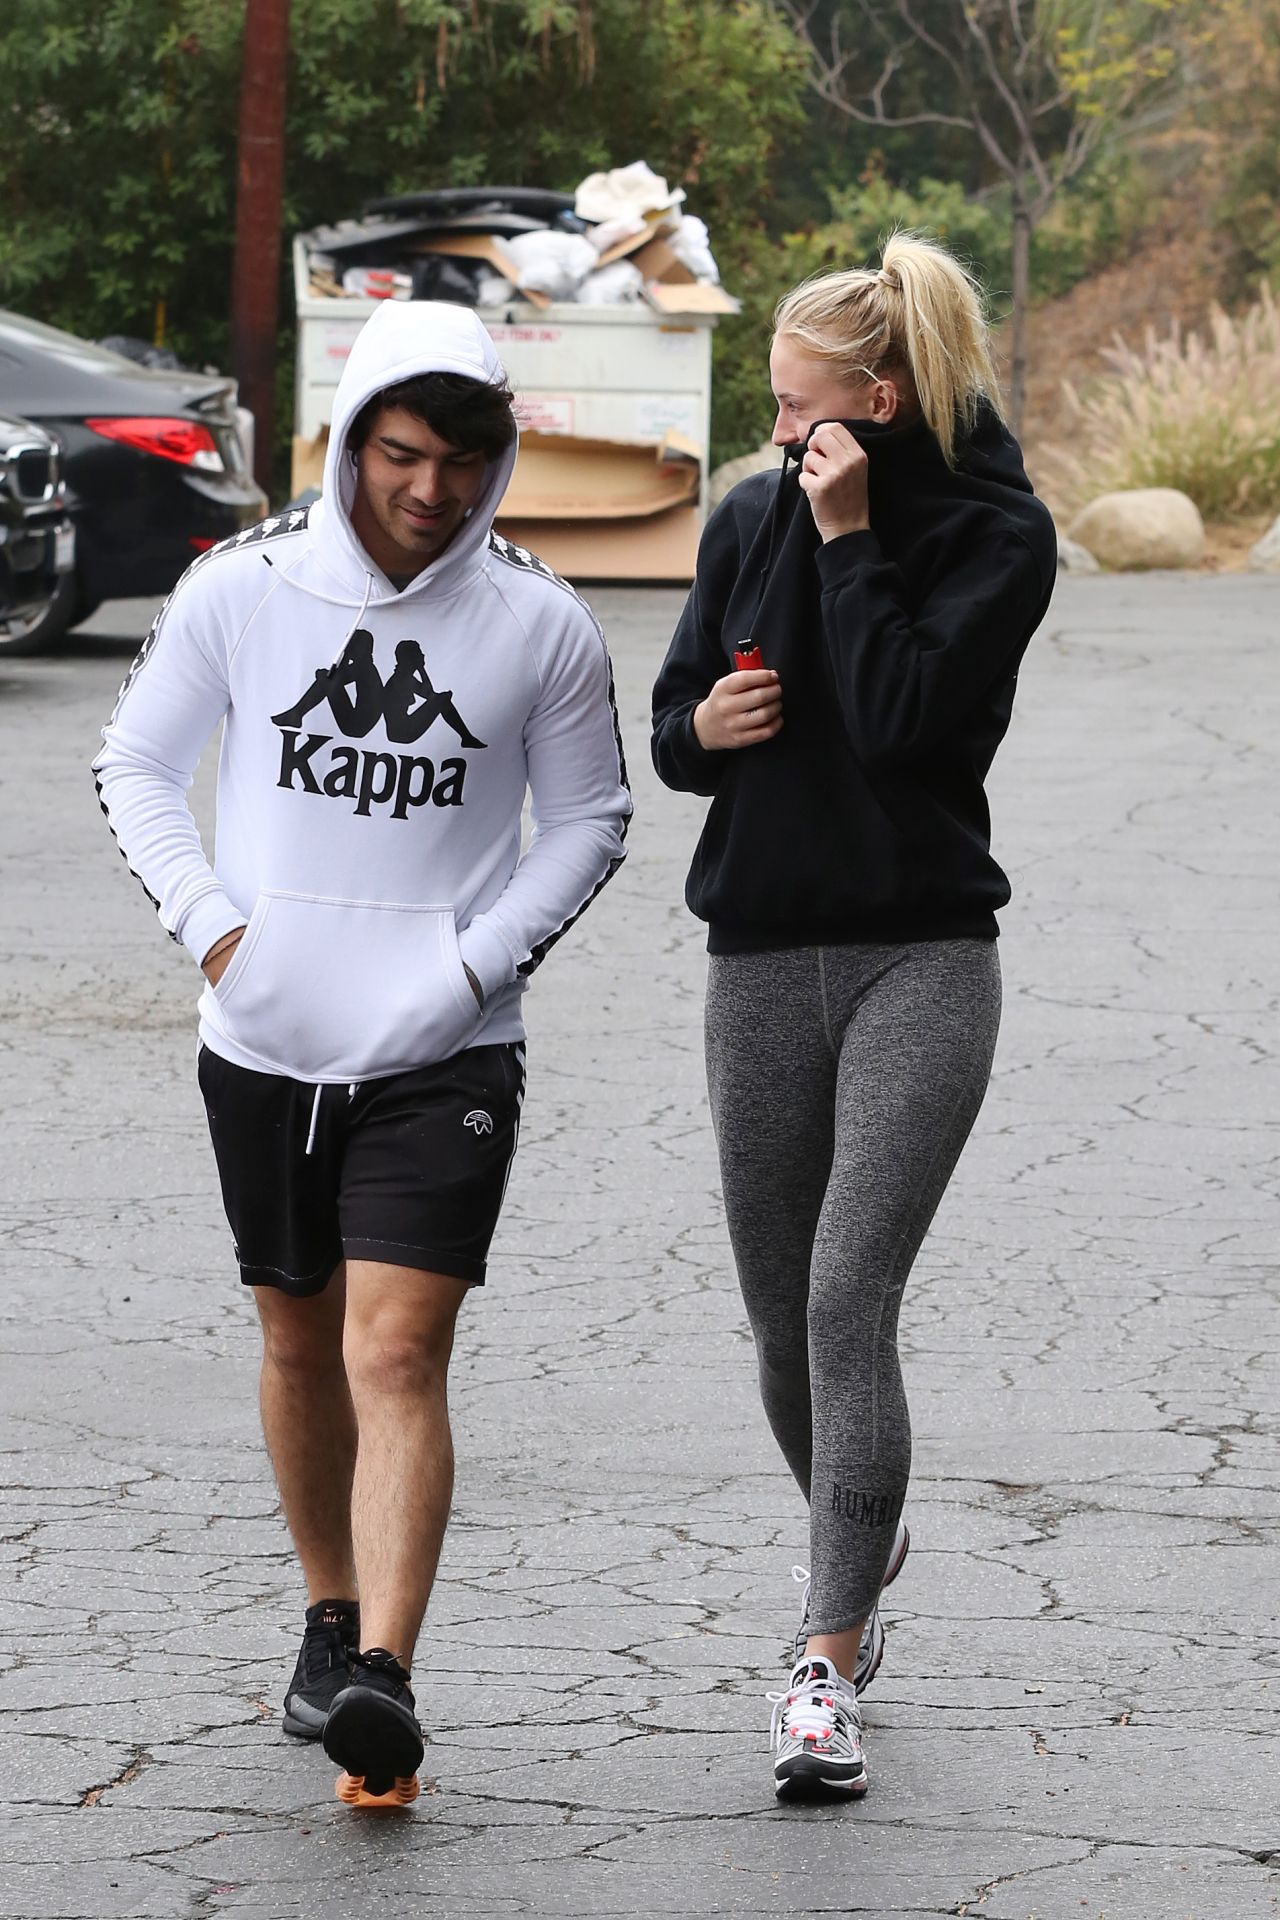 Sophie Turner and Joe Jonas - Morning Work Out Session in LA 09/26